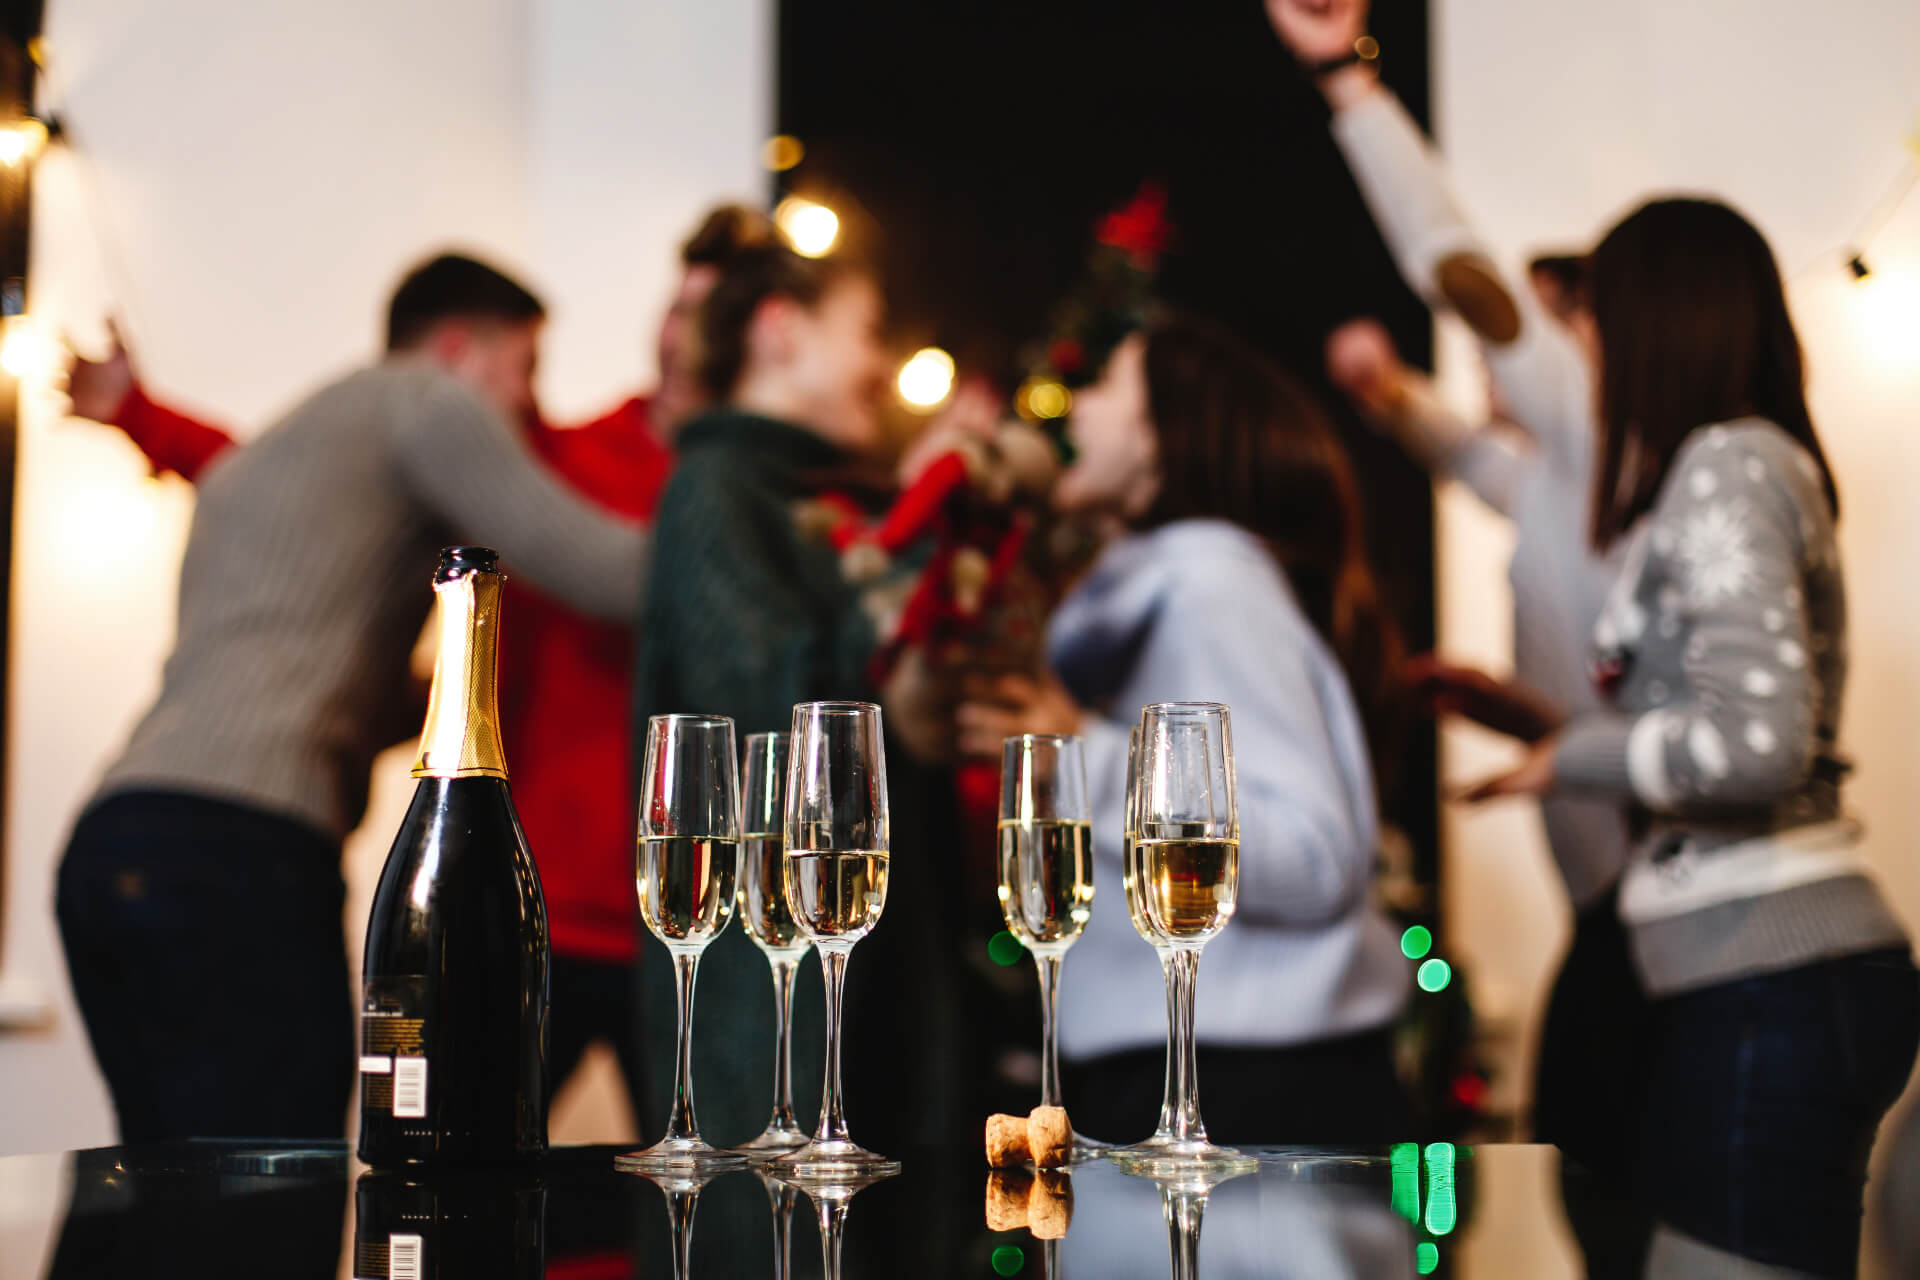 Planning a Linz Company Holiday Event? Get Inspired with These 6 Creative Ideas!